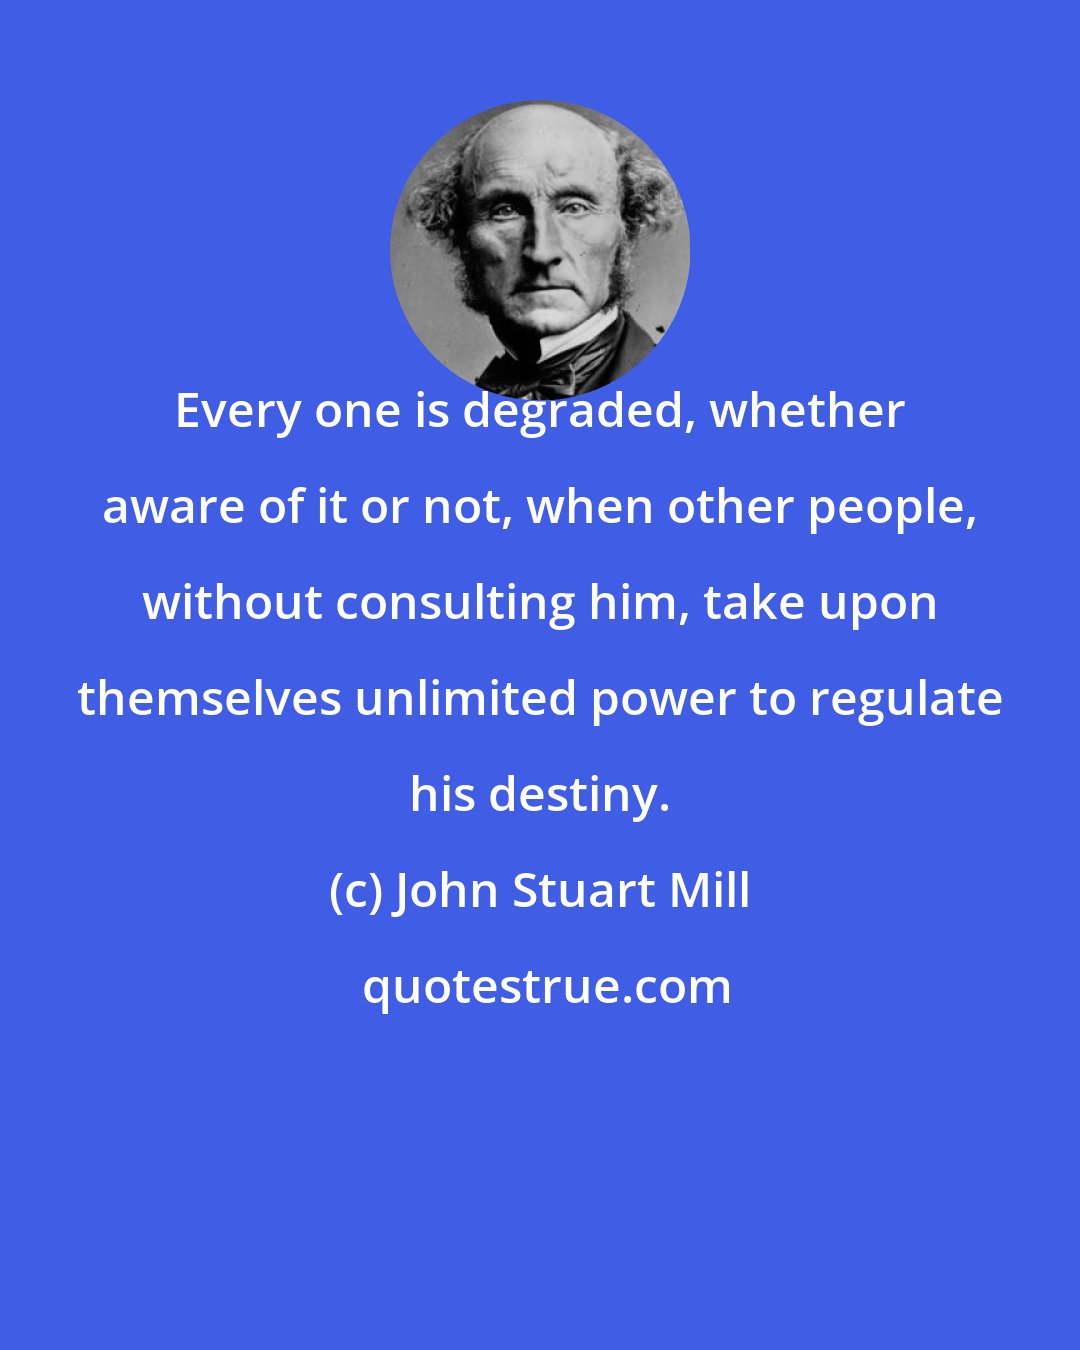 John Stuart Mill: Every one is degraded, whether aware of it or not, when other people, without consulting him, take upon themselves unlimited power to regulate his destiny.